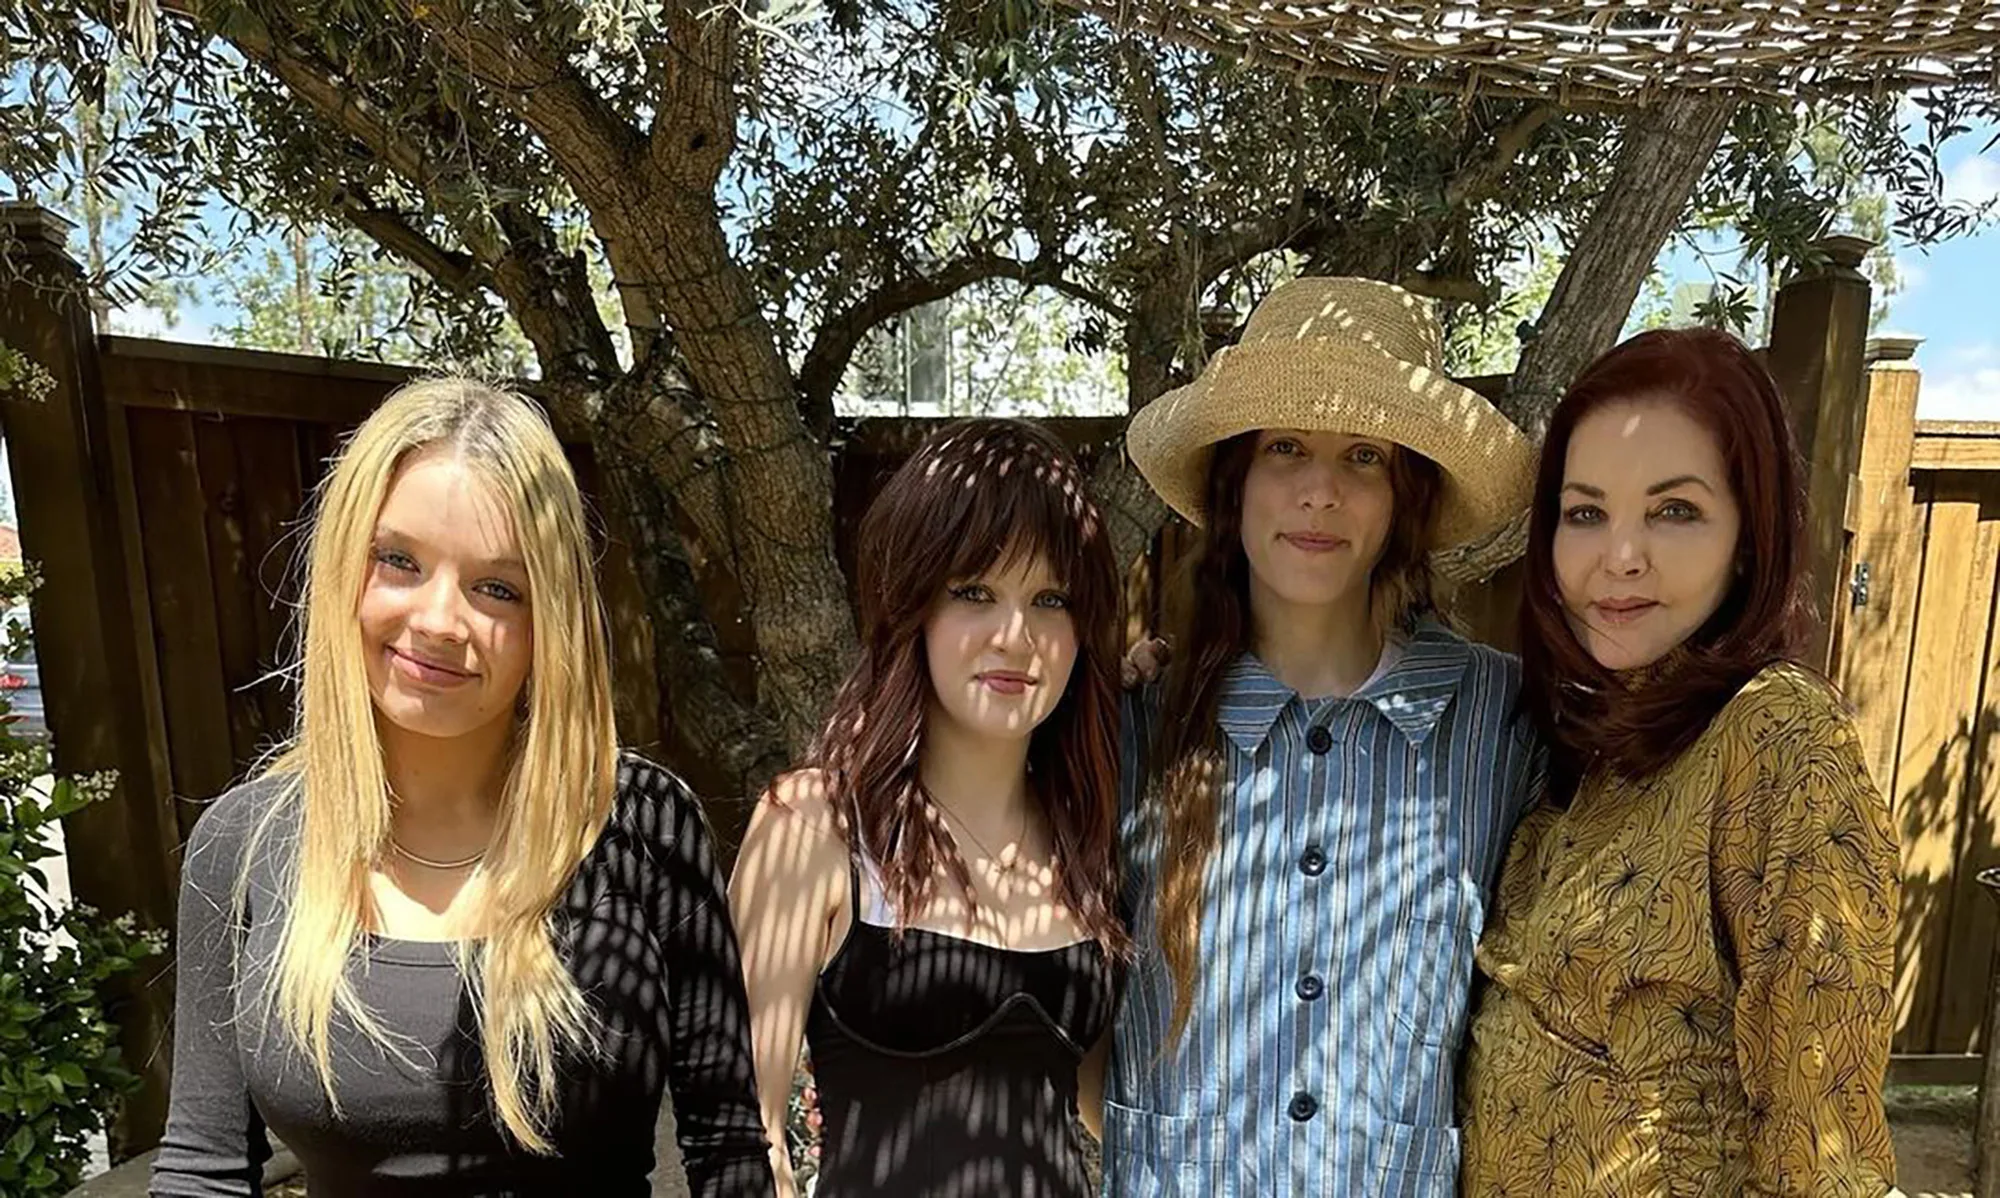 Priscilla Presley shares photo with Riley Keough, Lisa Marie's twins after trust drama